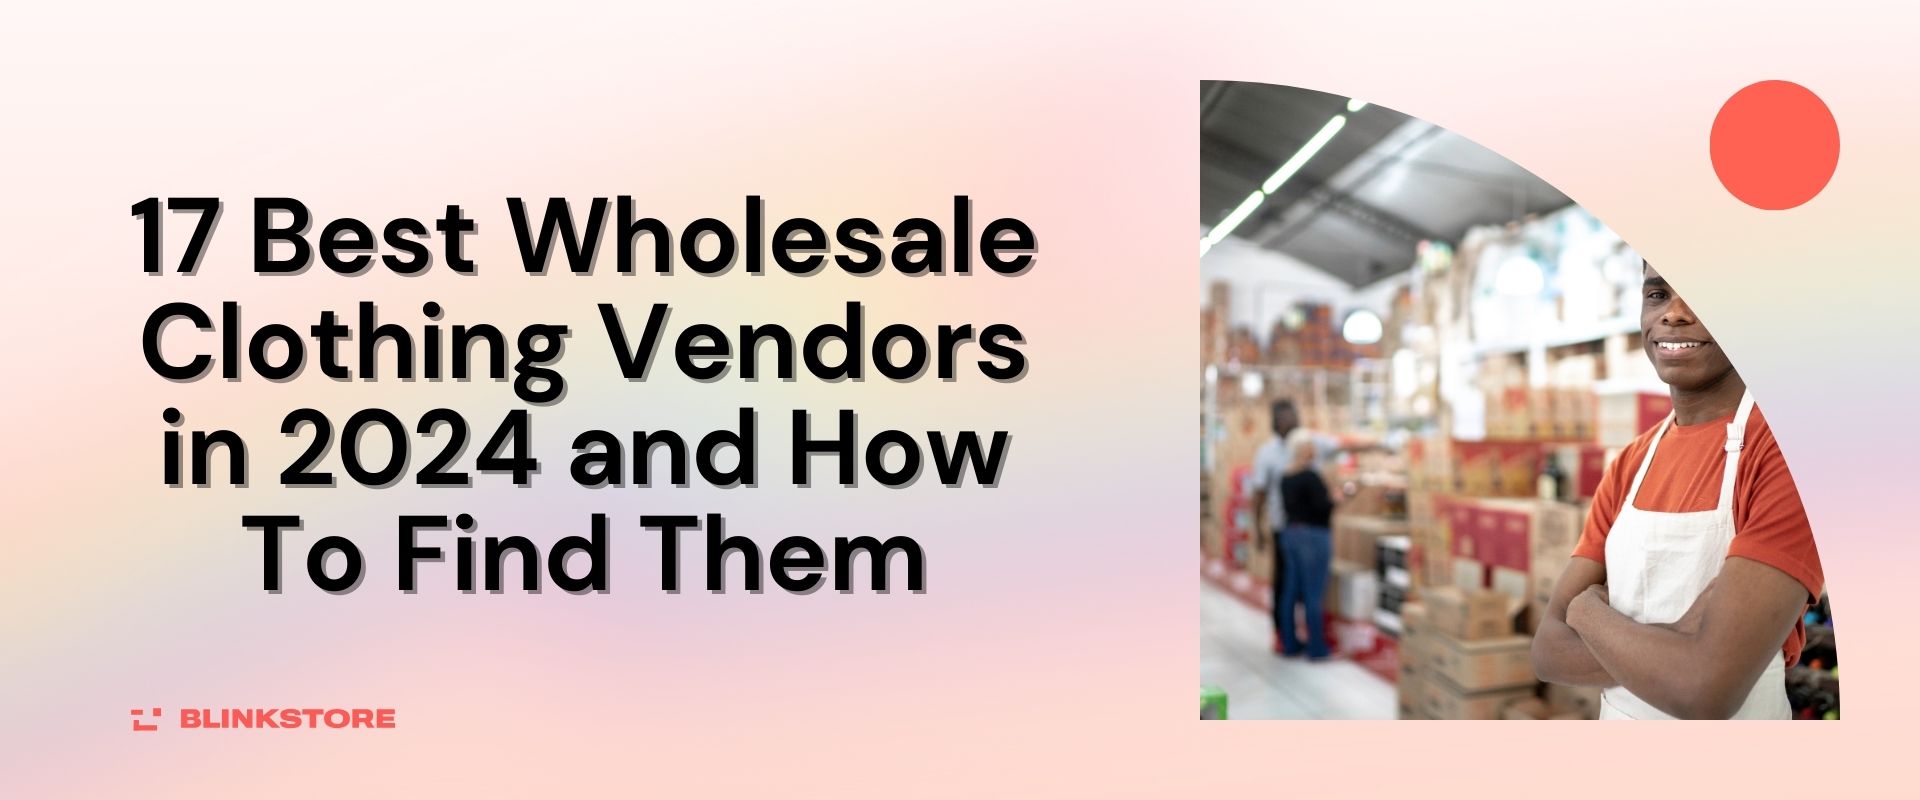 17 Best Wholesale Clothing Vendors in 2024 and How To Find Them